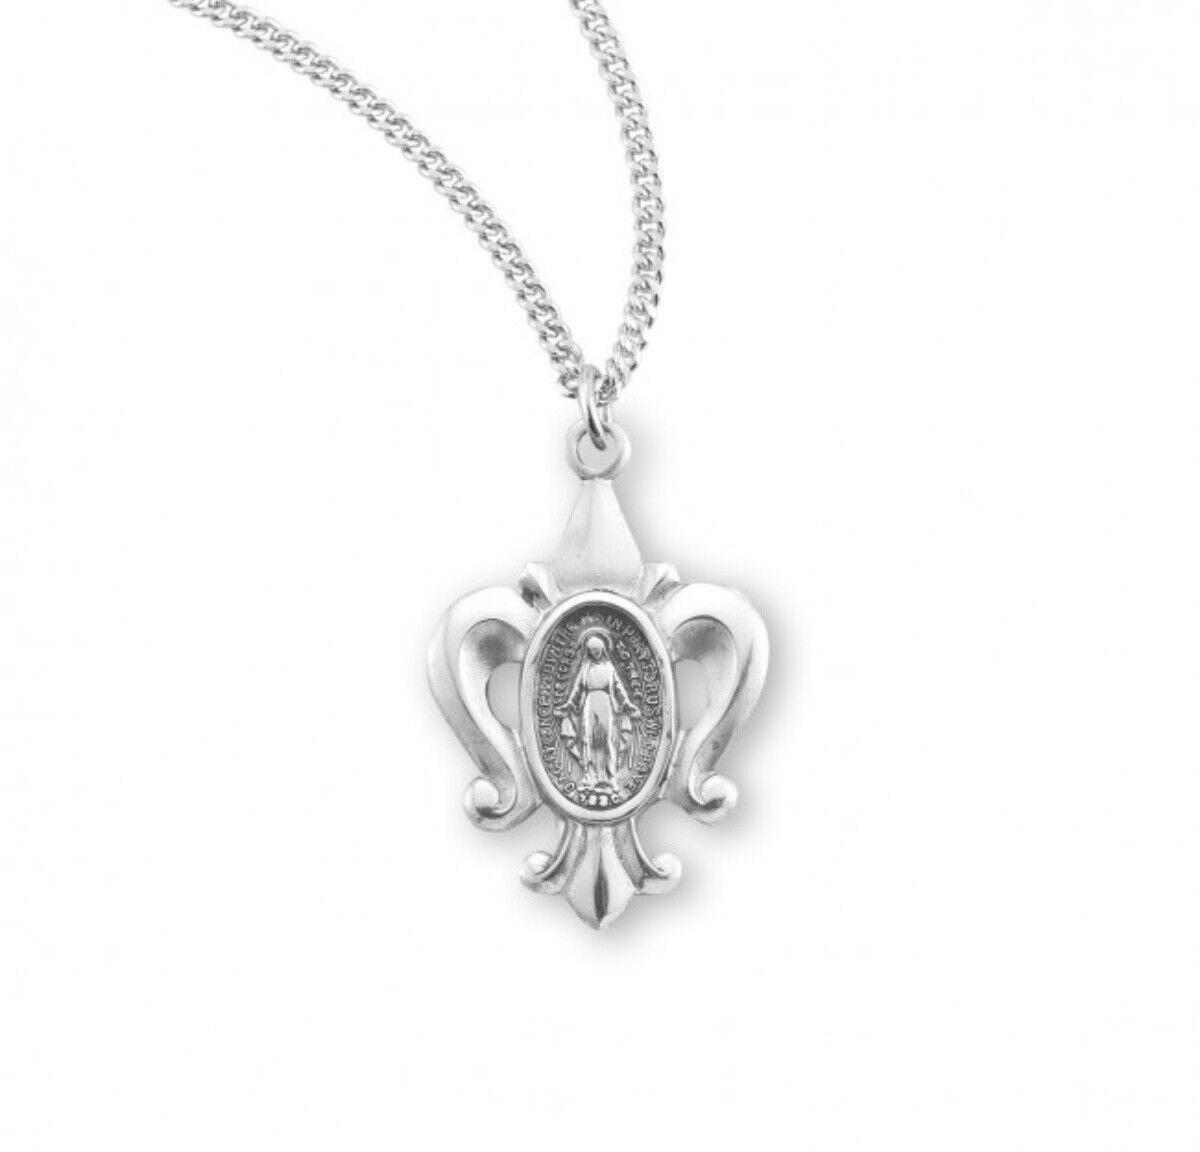 Sterling Silver Fleur De Lis Miraculous Medal with Chain, 1.0 Inch N.G.